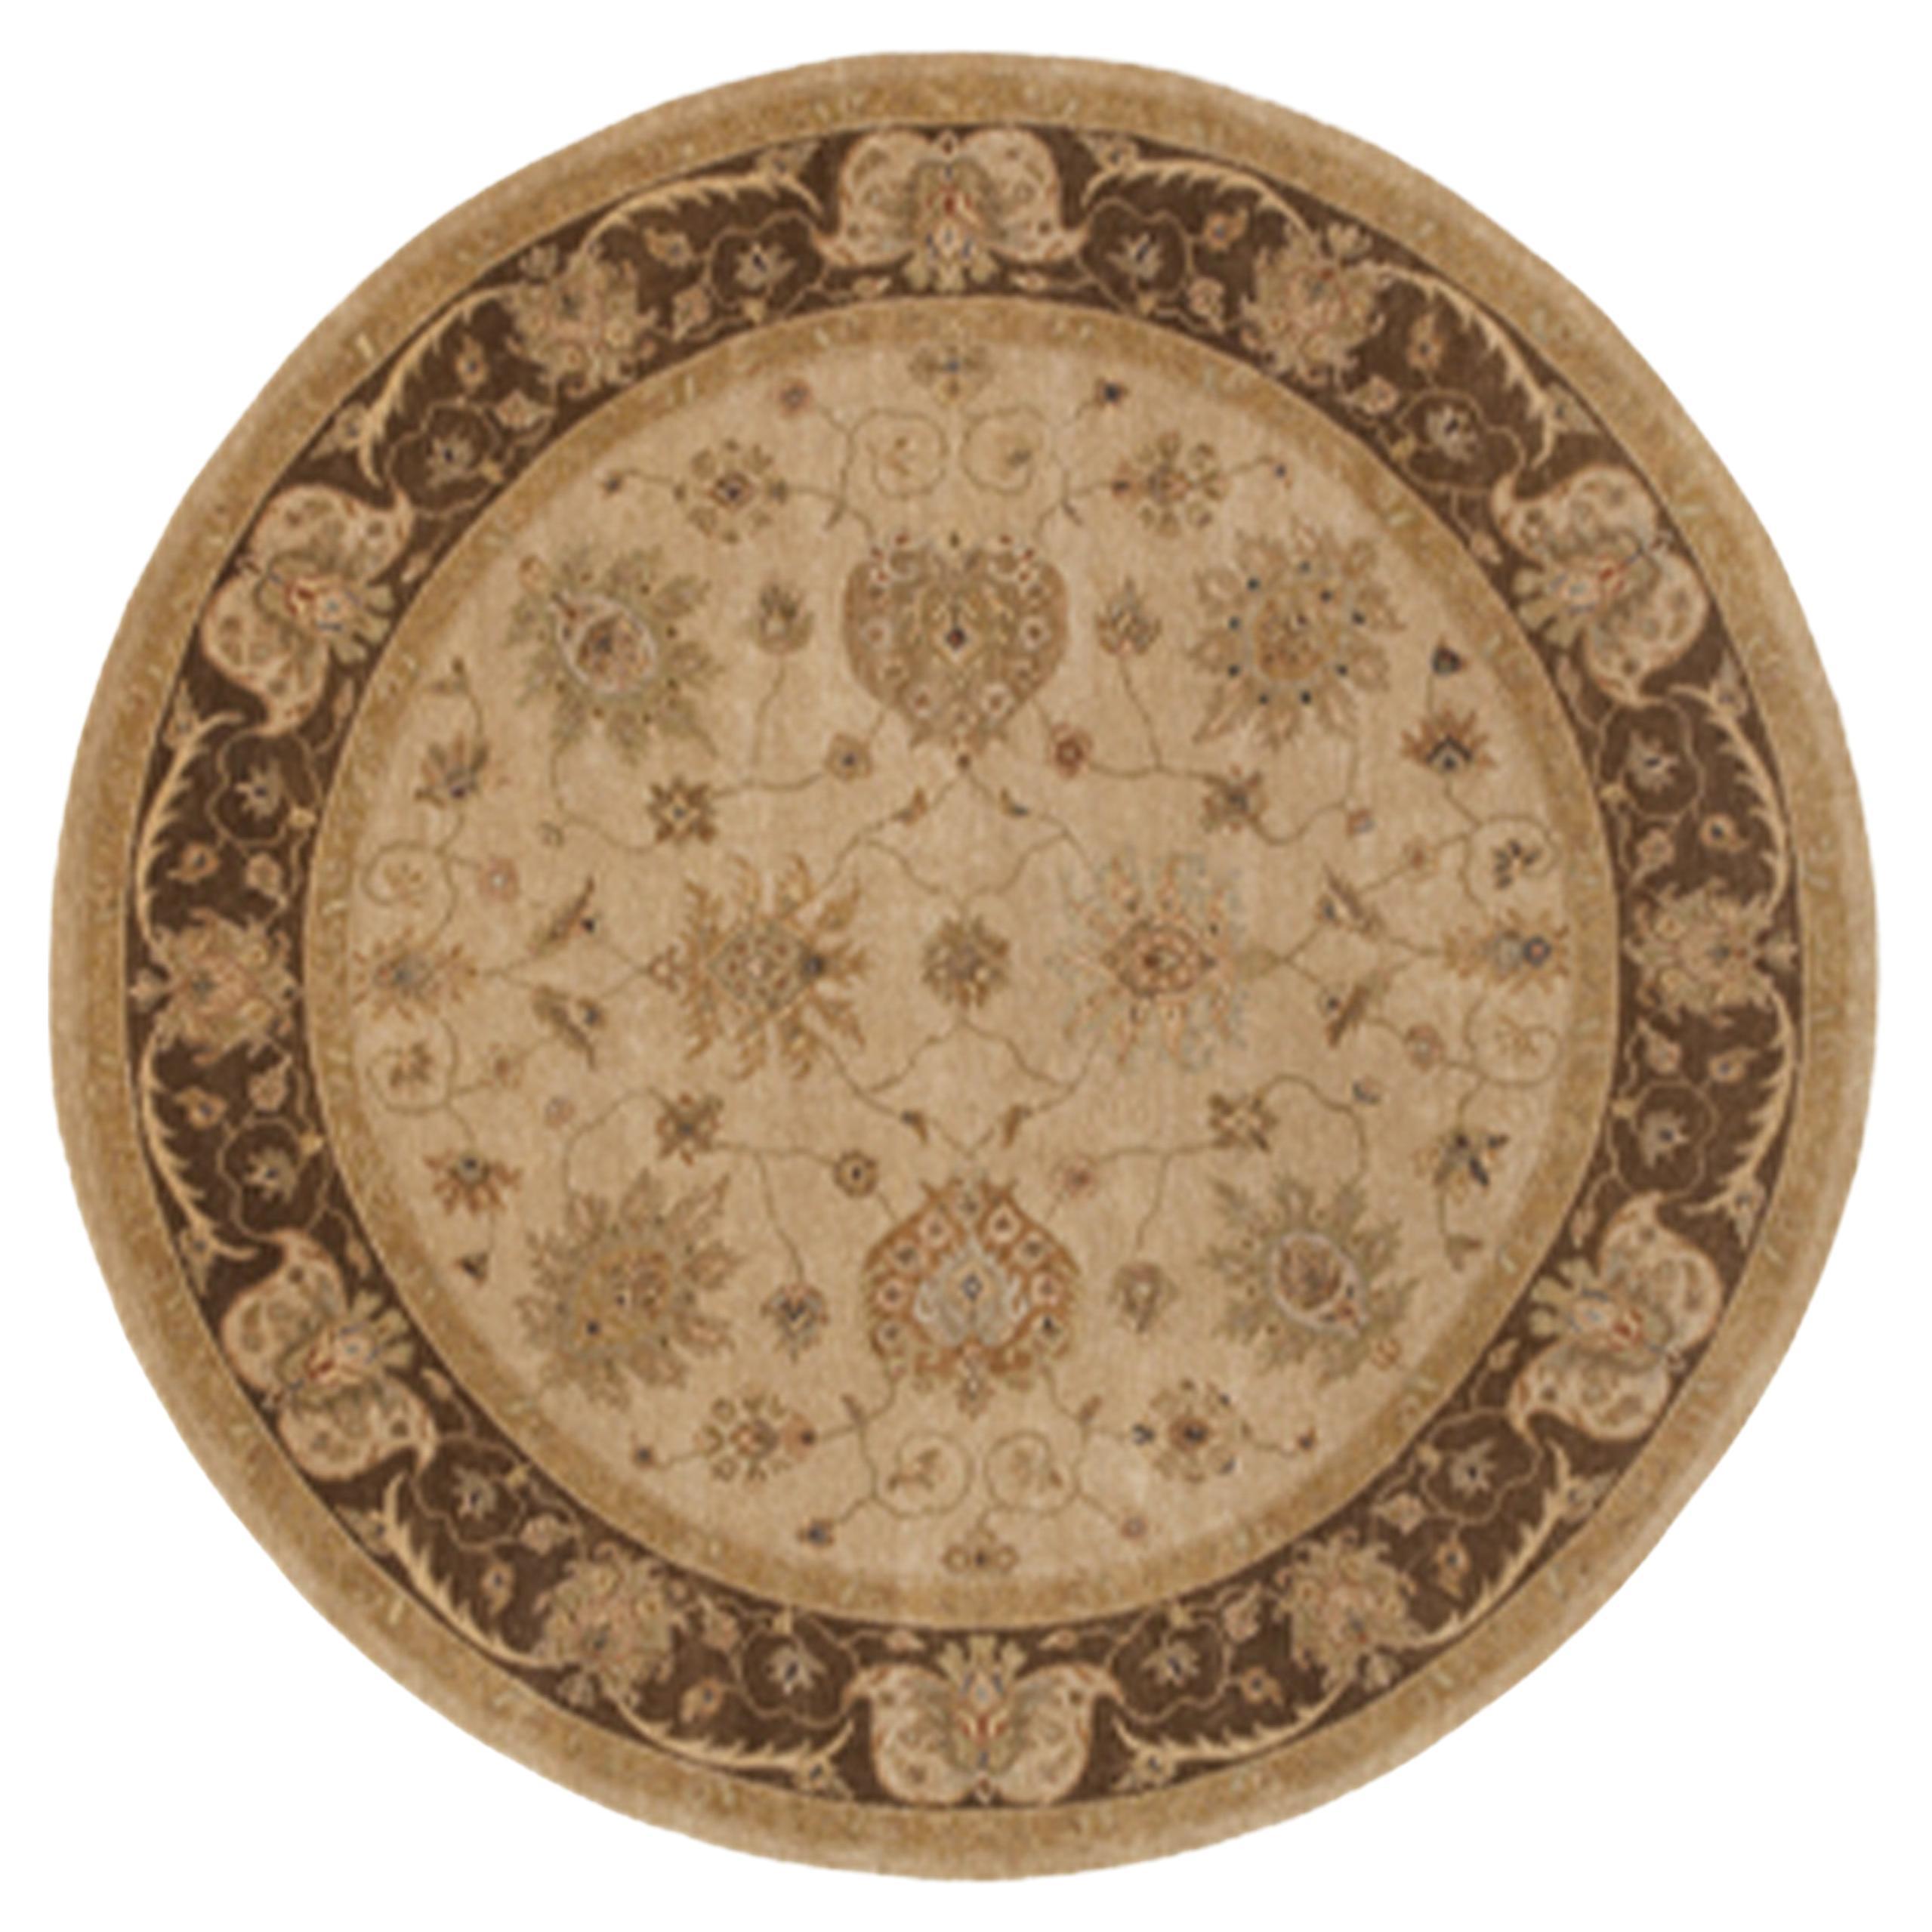 Luxury Traditional Hand-Knotted Amritsar Mogul Beige/Brown 12x12 Round Rug